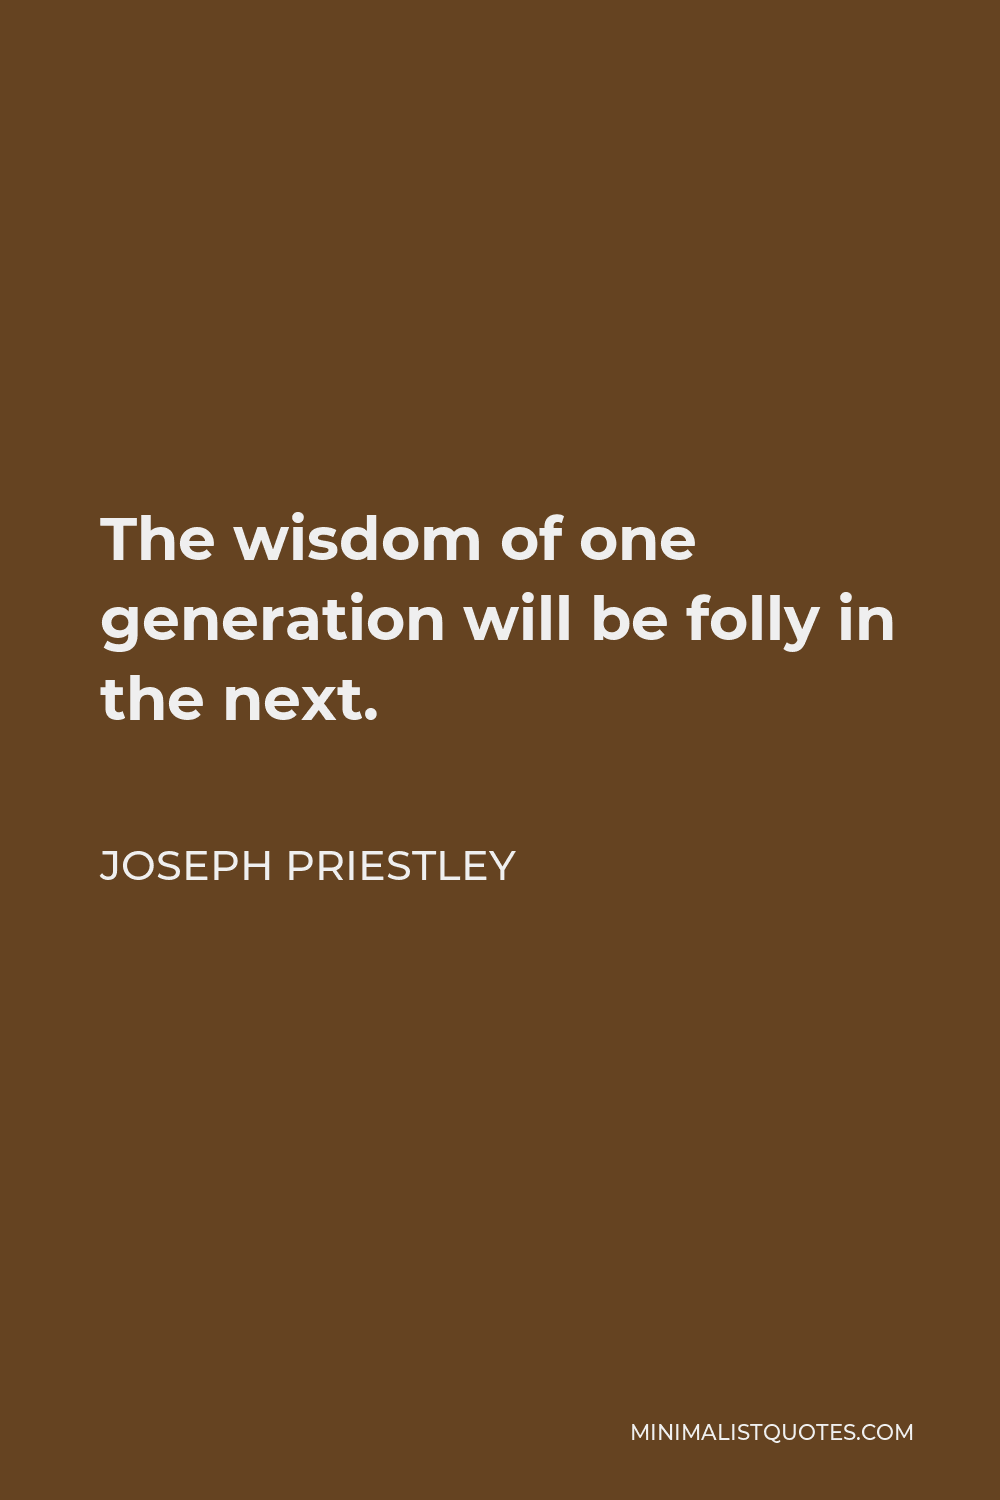 Joseph Priestley Quote - The wisdom of one generation will be folly in the next.